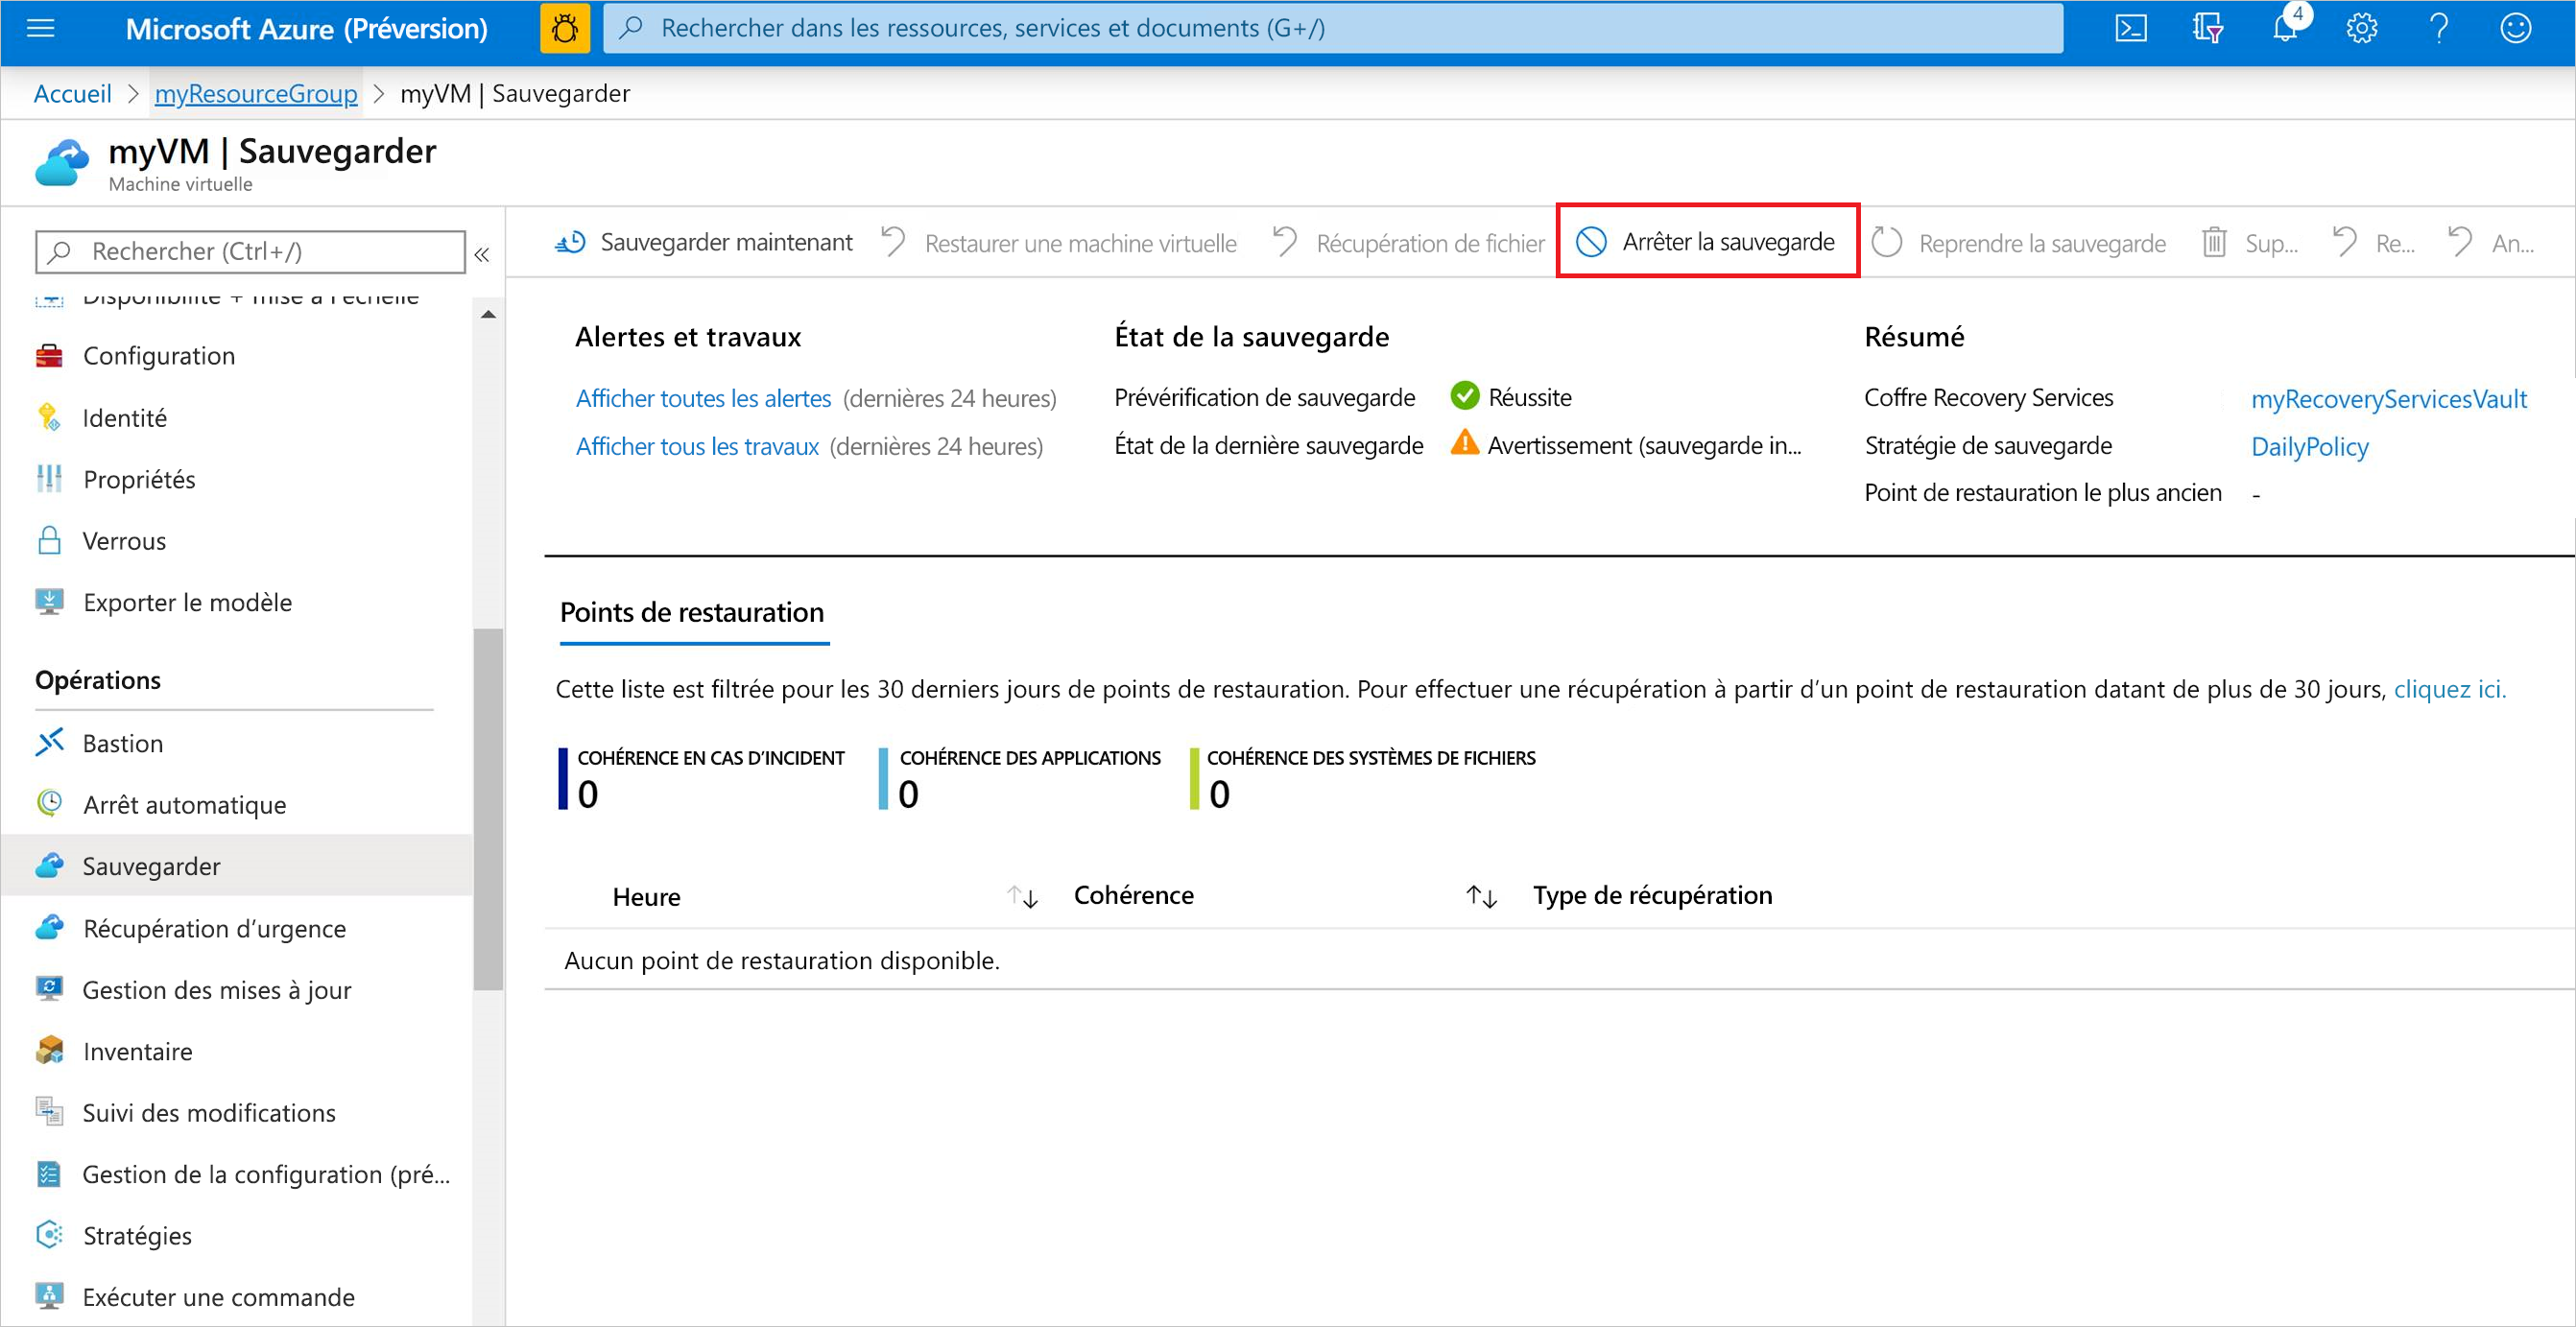 Screenshot showing to stop VM backup from the Azure portal.